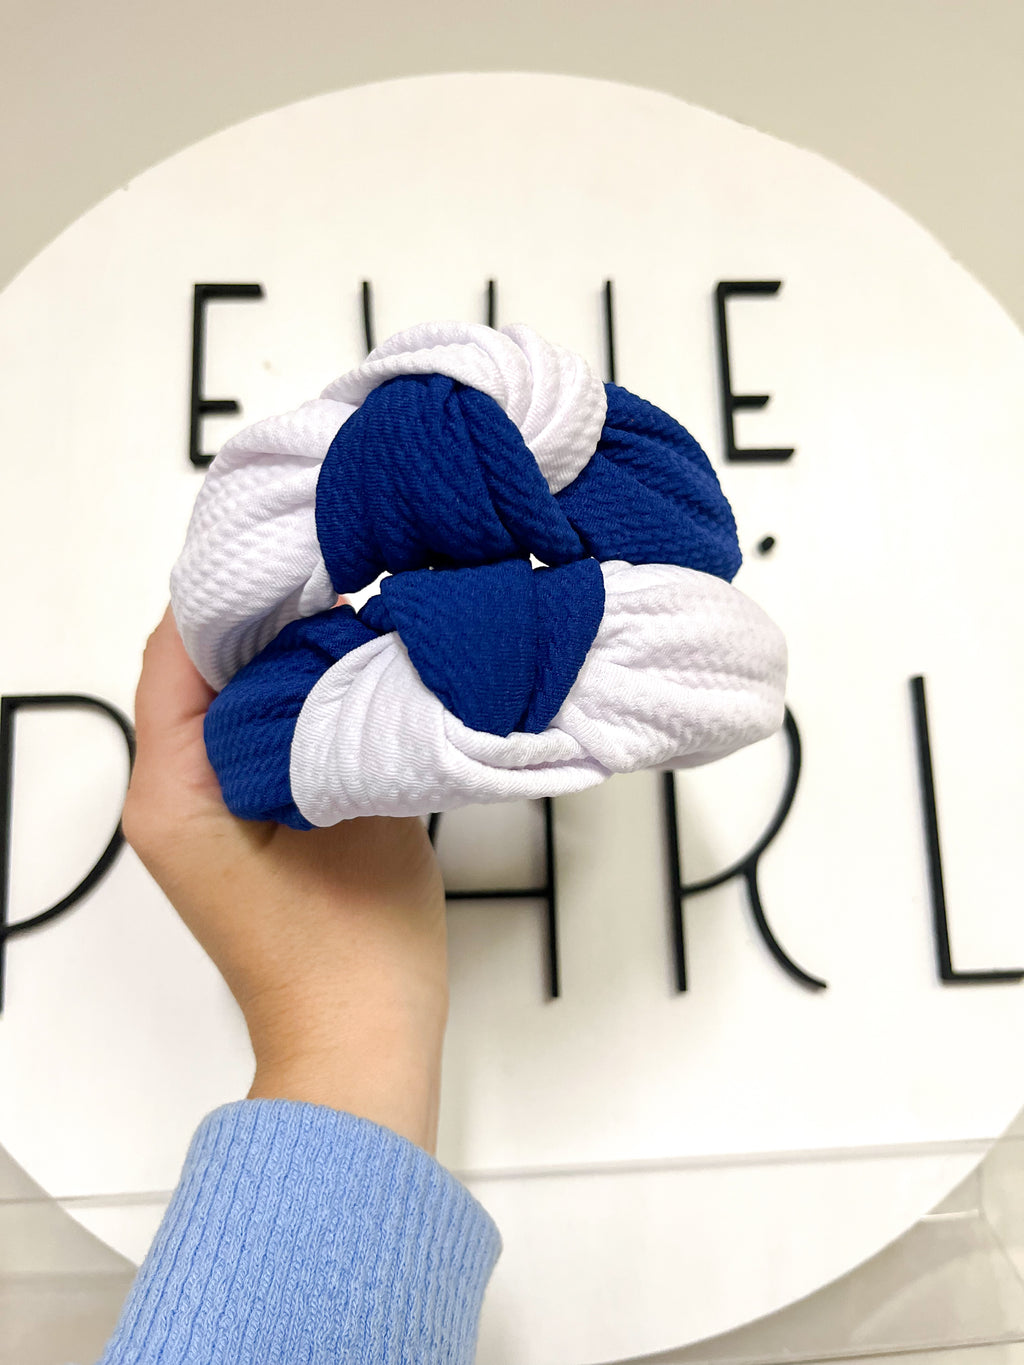 Royal Blue/White Colorblock Knotted Headband